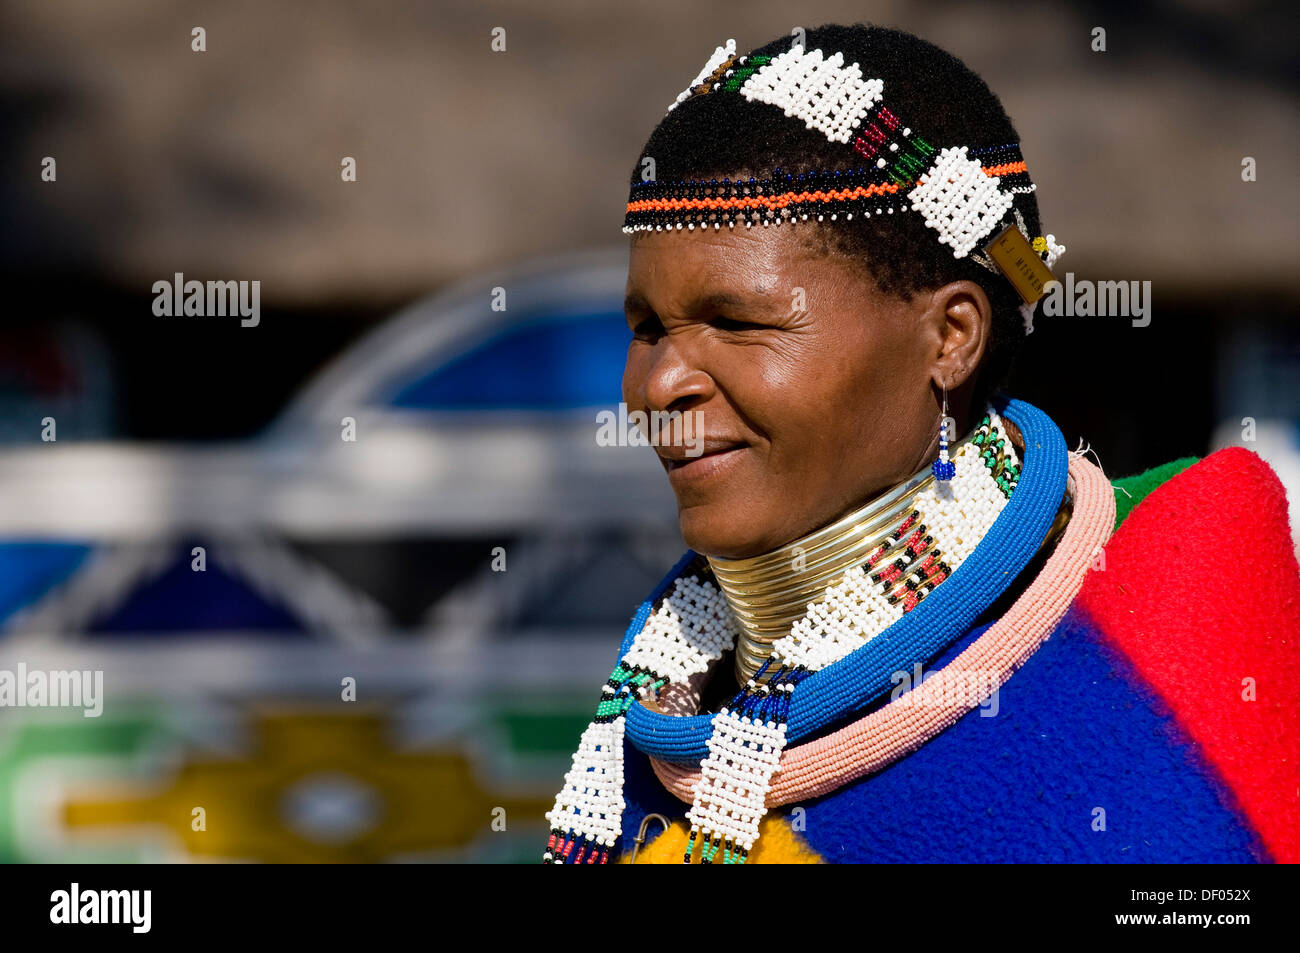 Ndebele woman wearing traditional dress, portrait, Botshabele Mission Station, Limpopo, South Africa, Africa Stock Photo